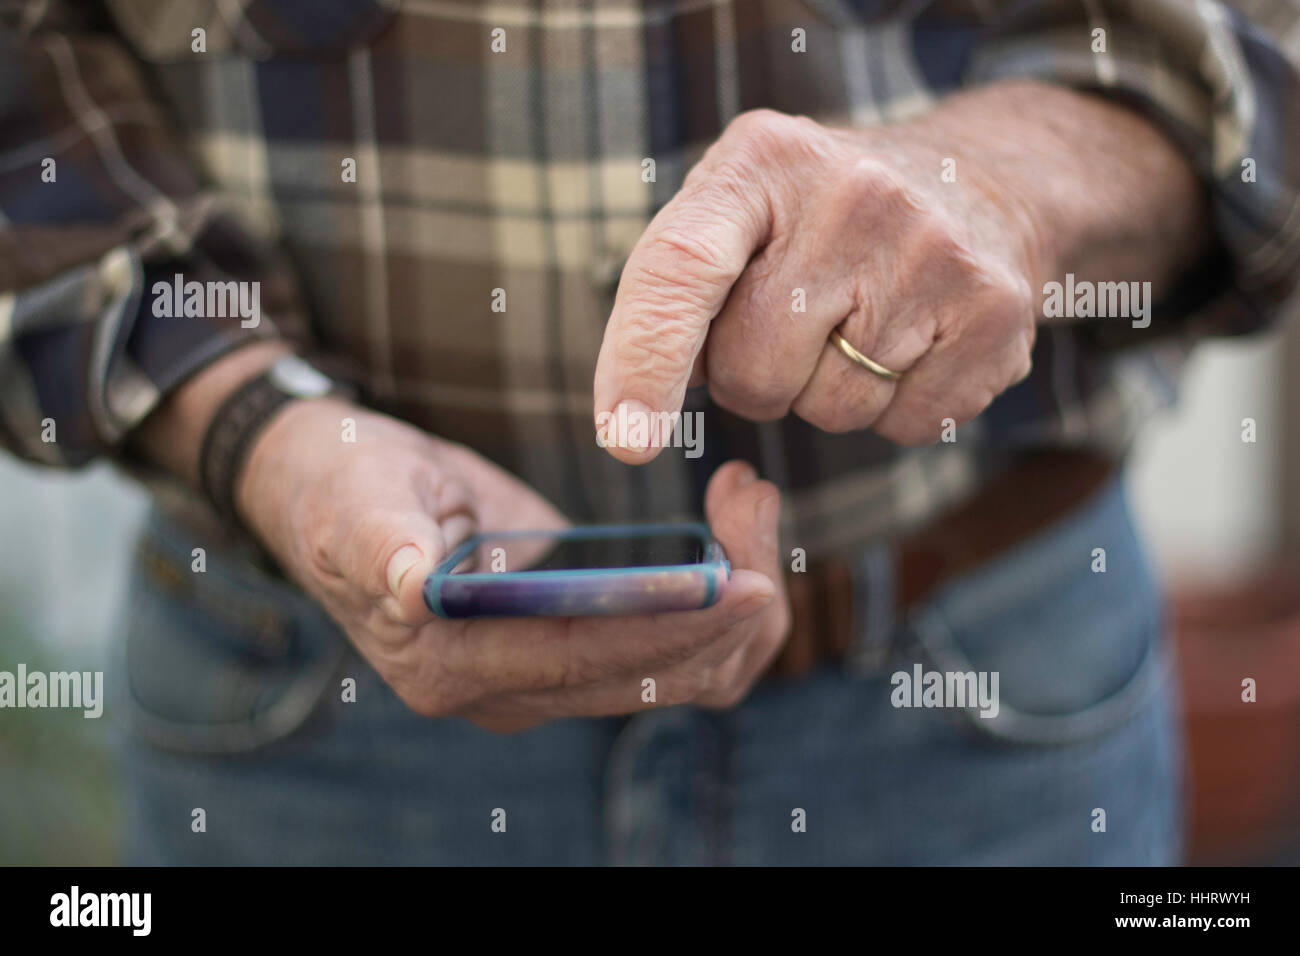 Man pointing to iPhone face on ready to enter horizontal Stock Photo